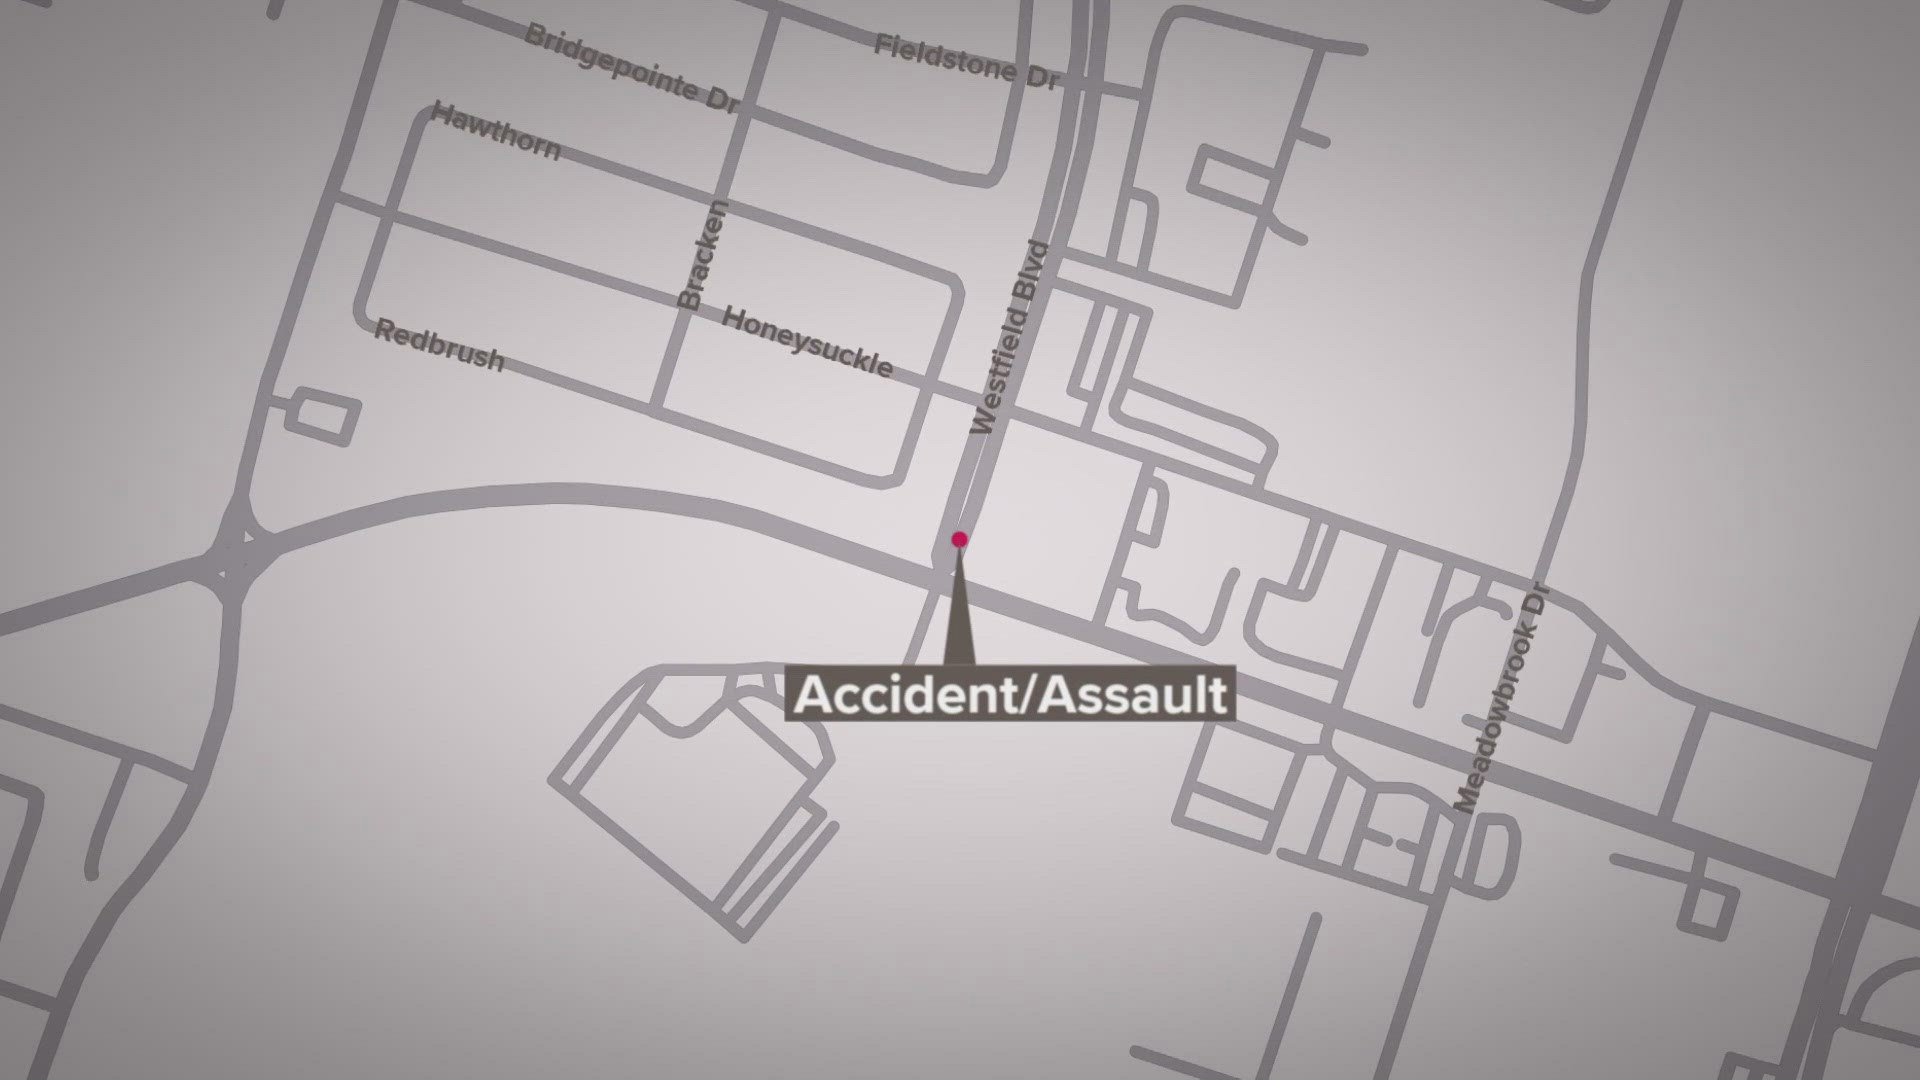 Police said a victim told them she and her daughter were assaulted after approaching a car that allegedly hit them.